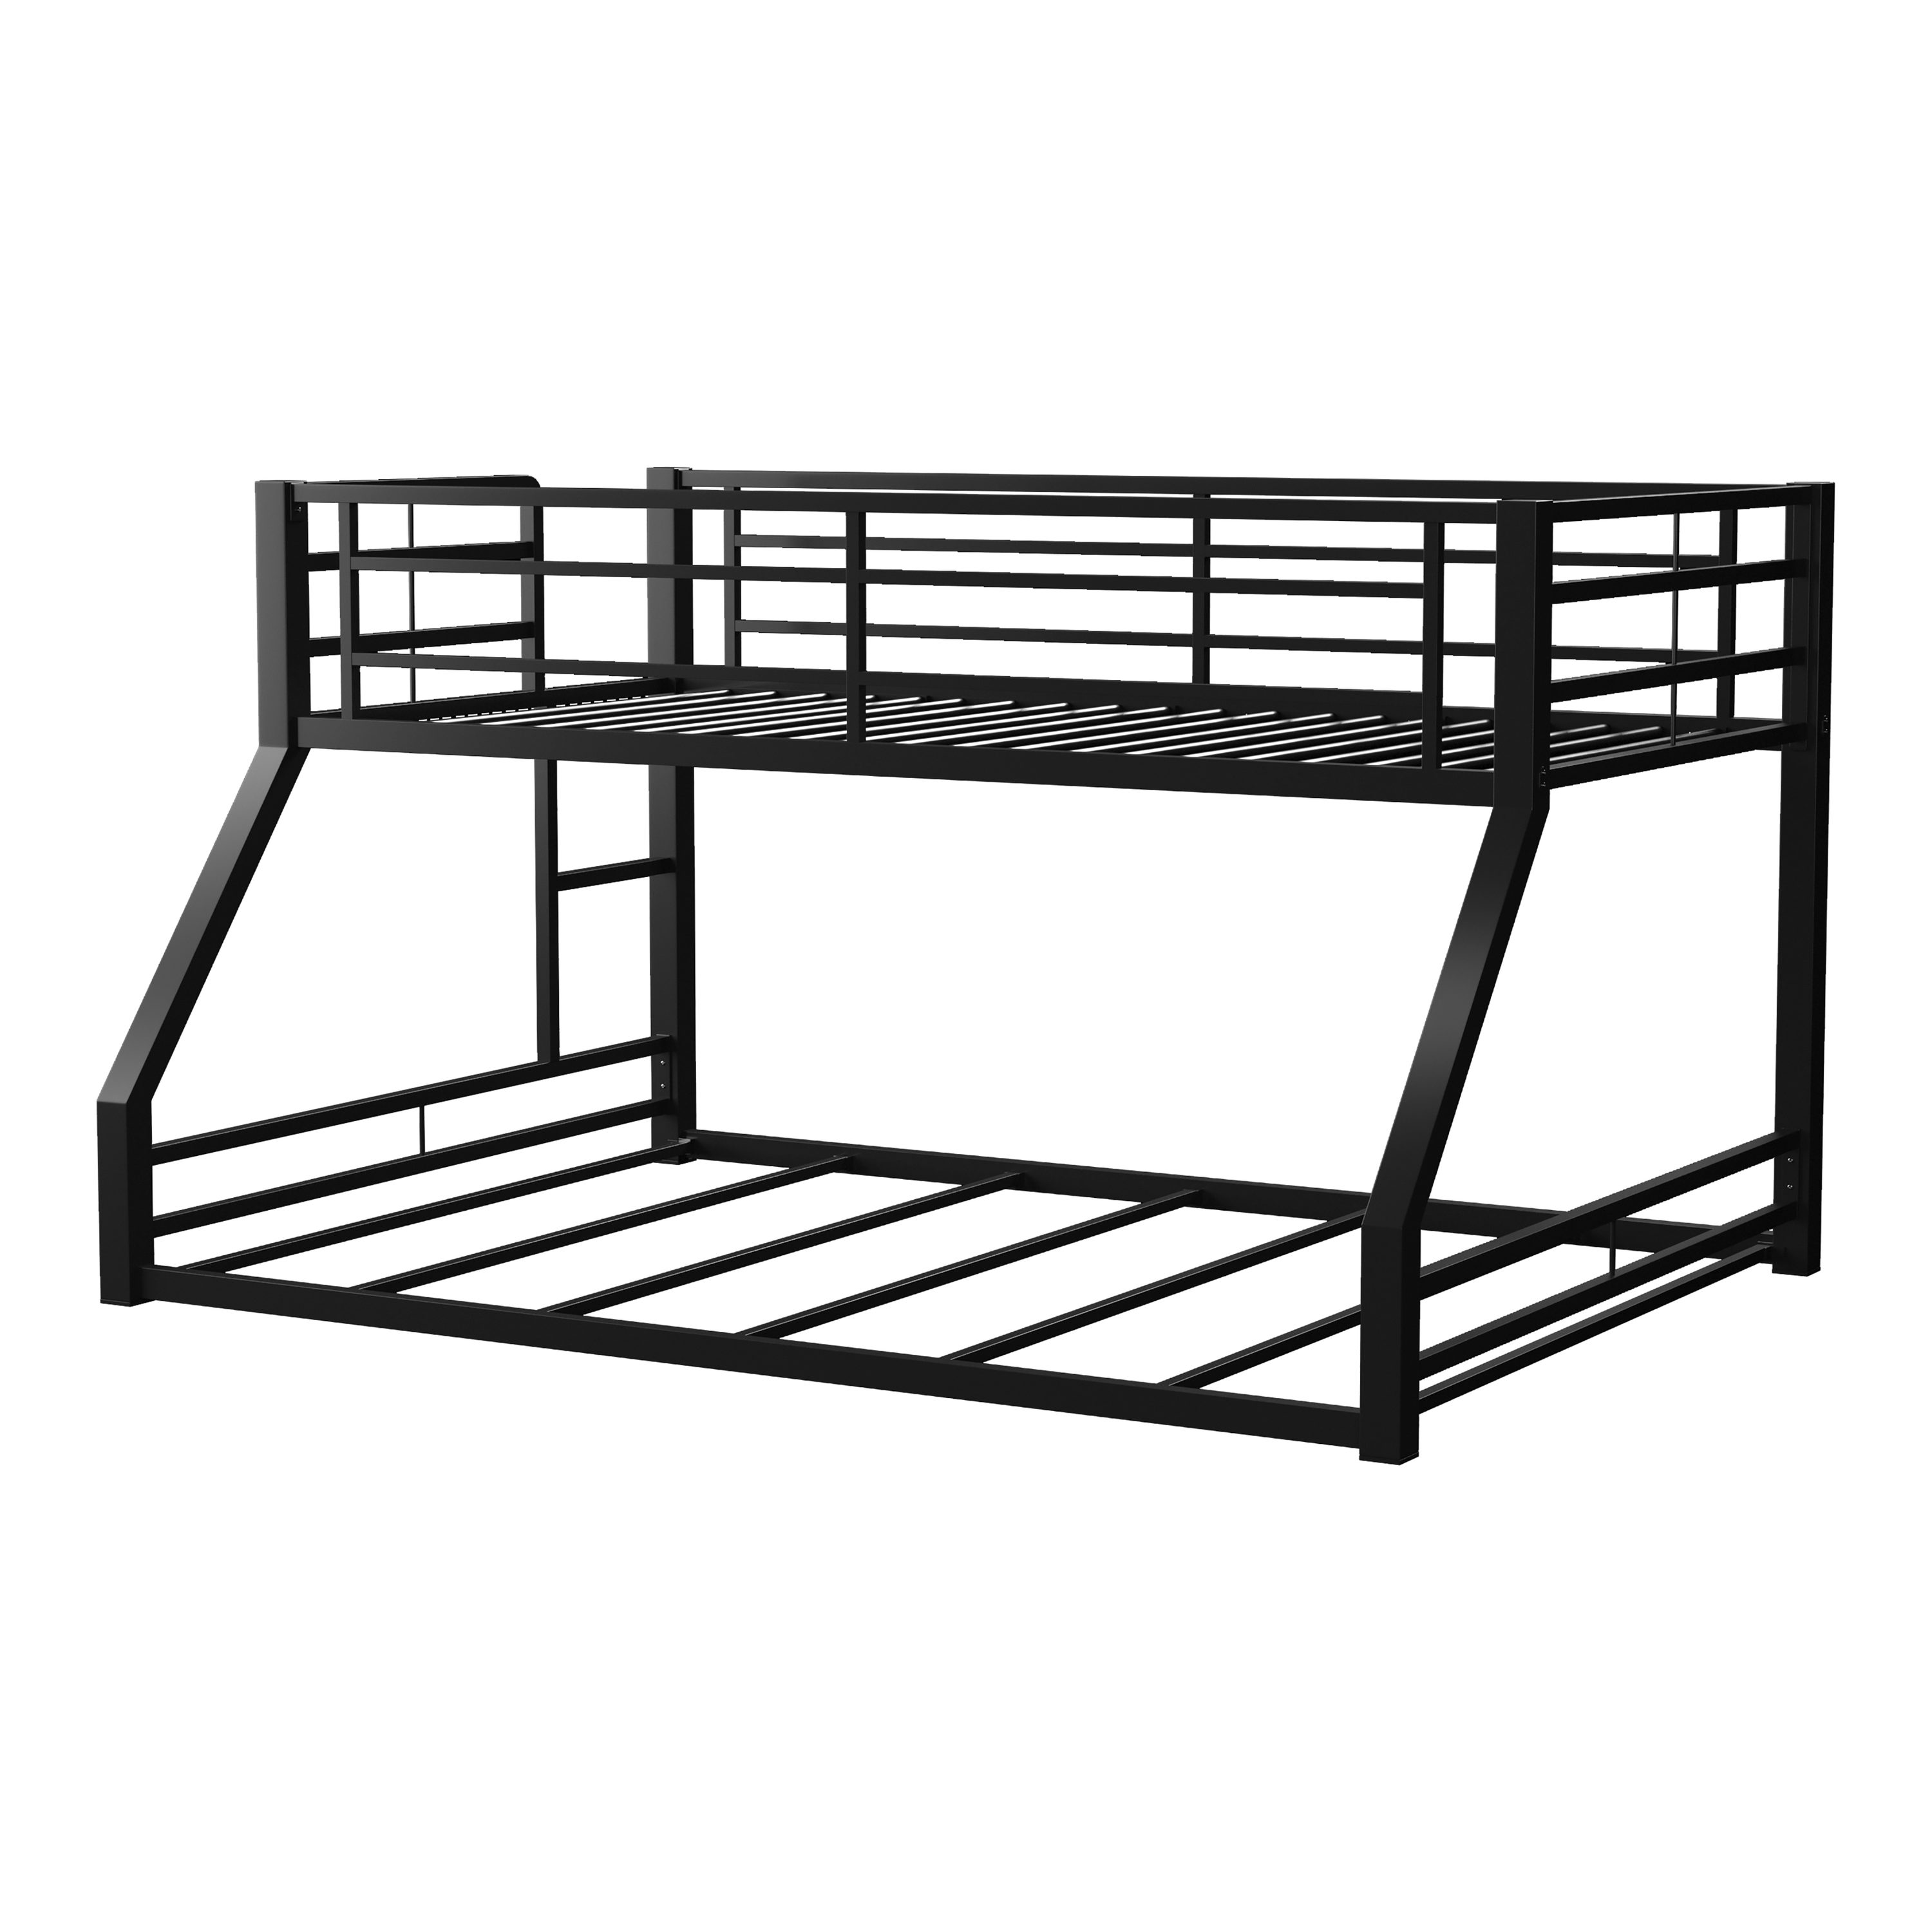 Full Bunk Bed In The Beds, Furniture Of America Twin Over Full Bunk Bed